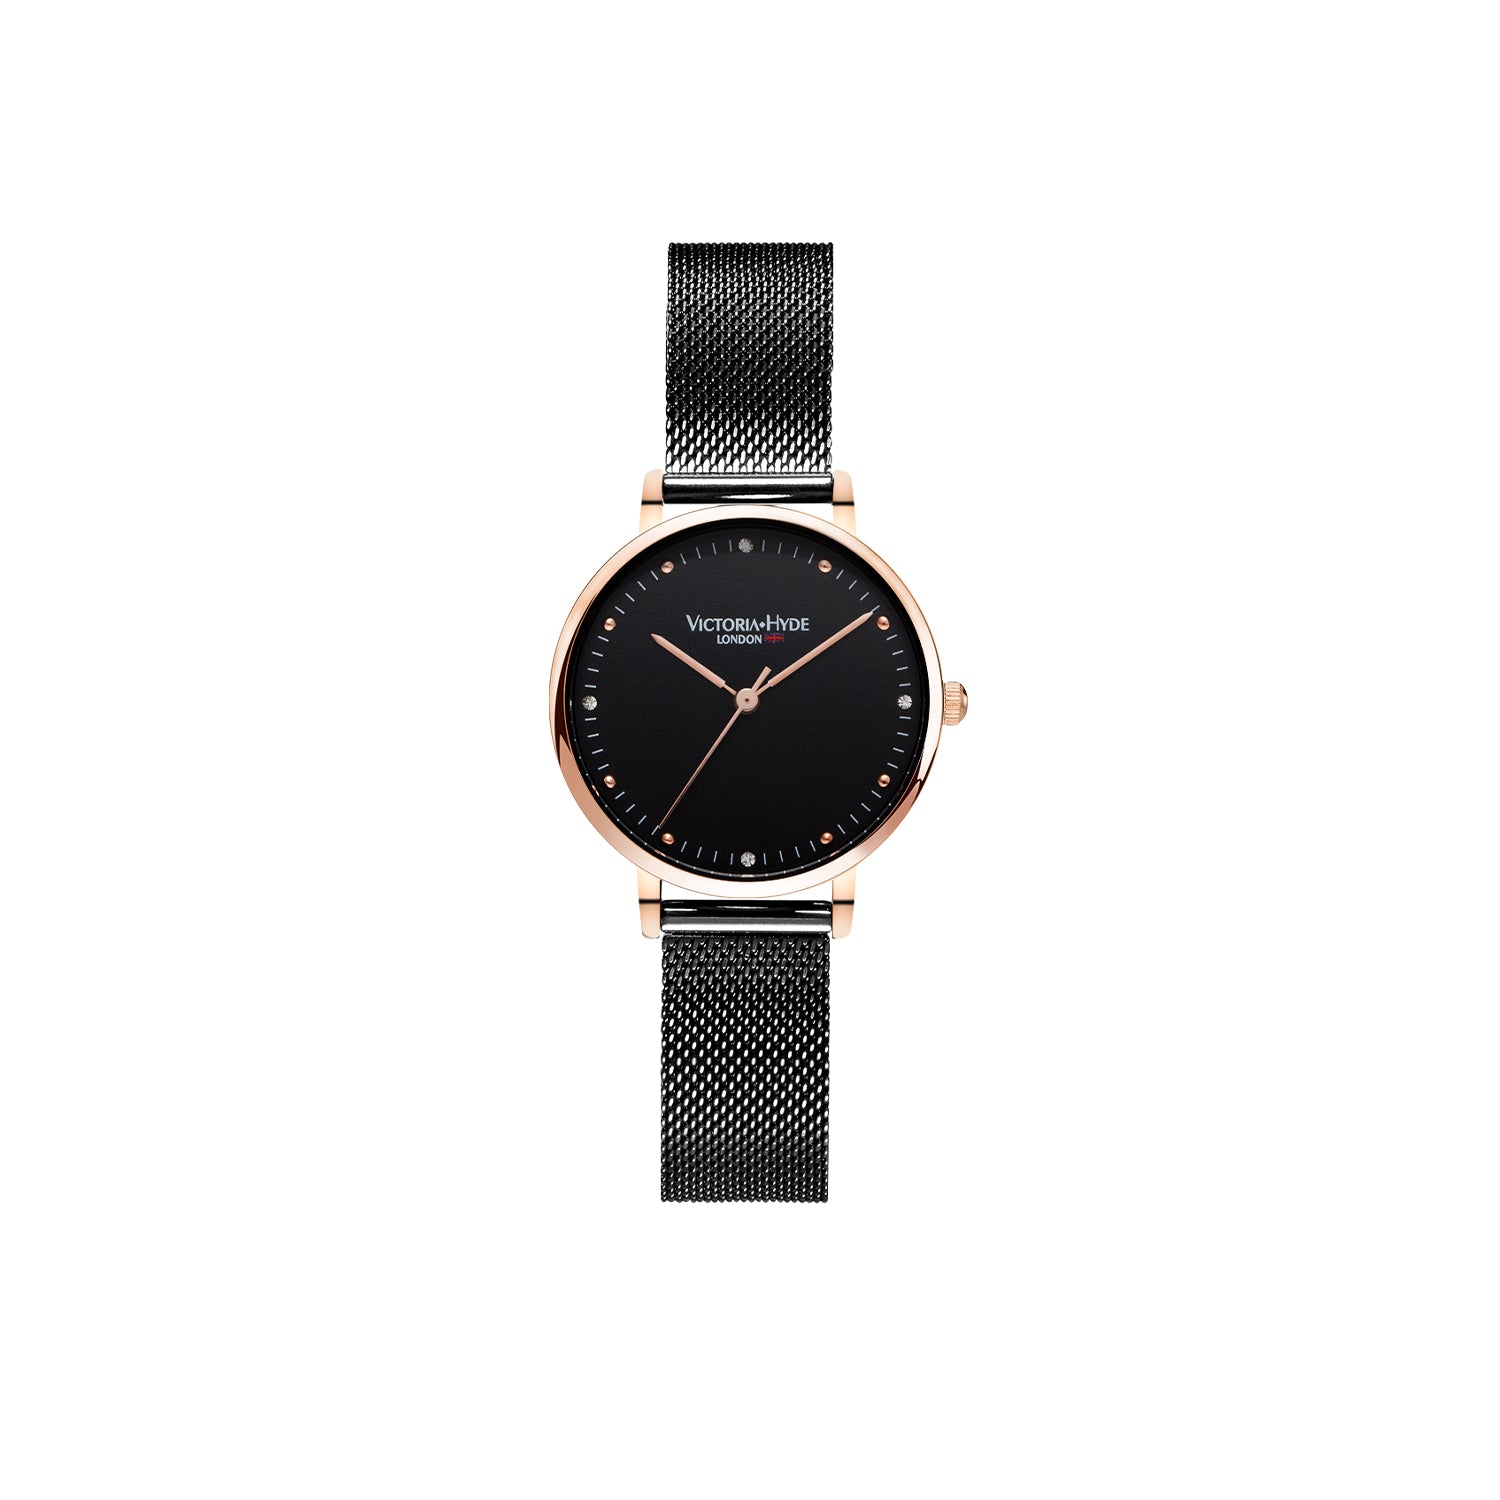 The Portobello Collection watch in black rose gold